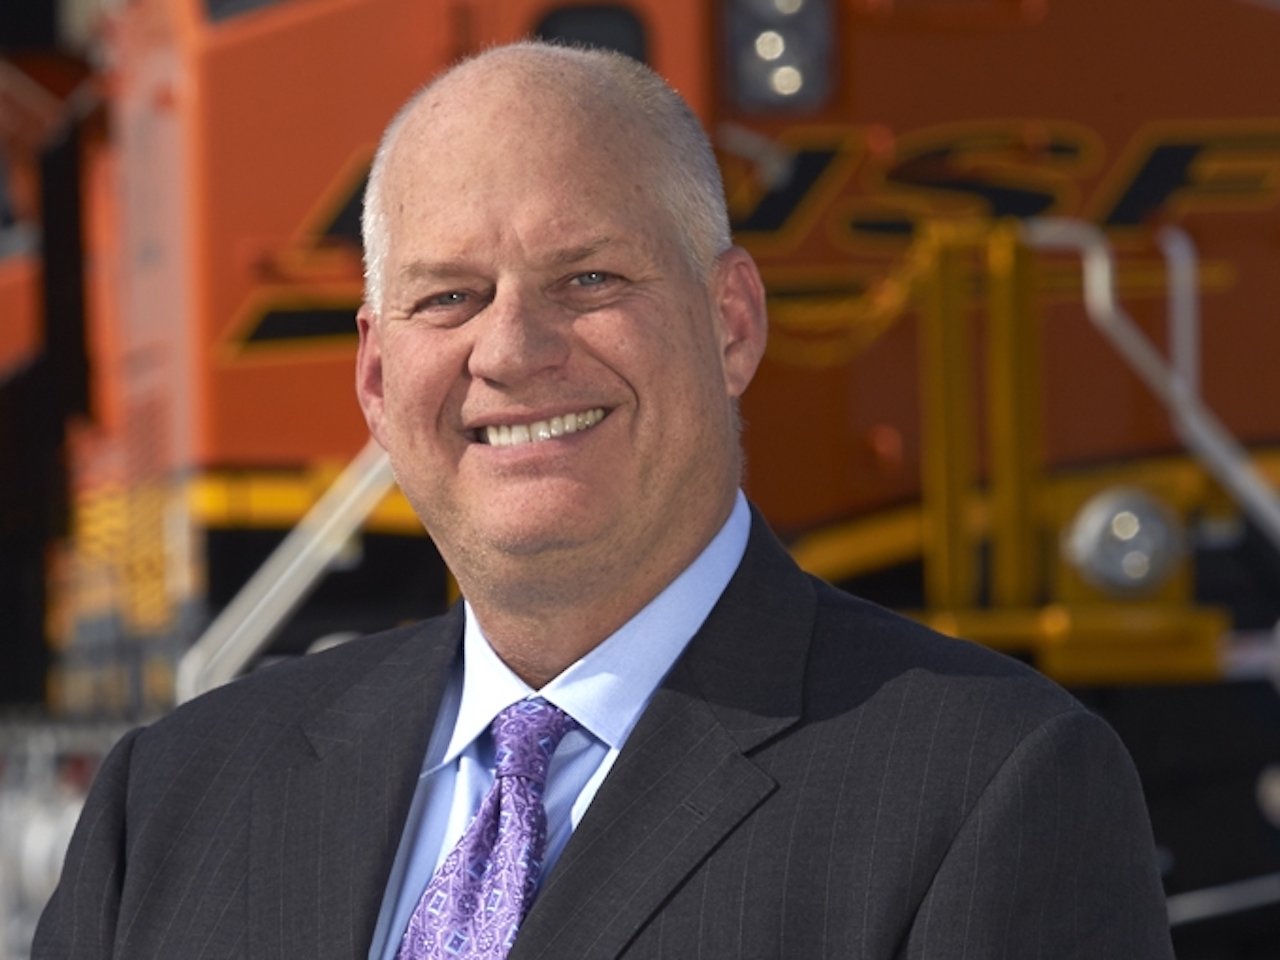 Carl Ice, former President and CEO of BNSF, will be inducted into the Kansas Business Hall of Fame on Oct. 4.